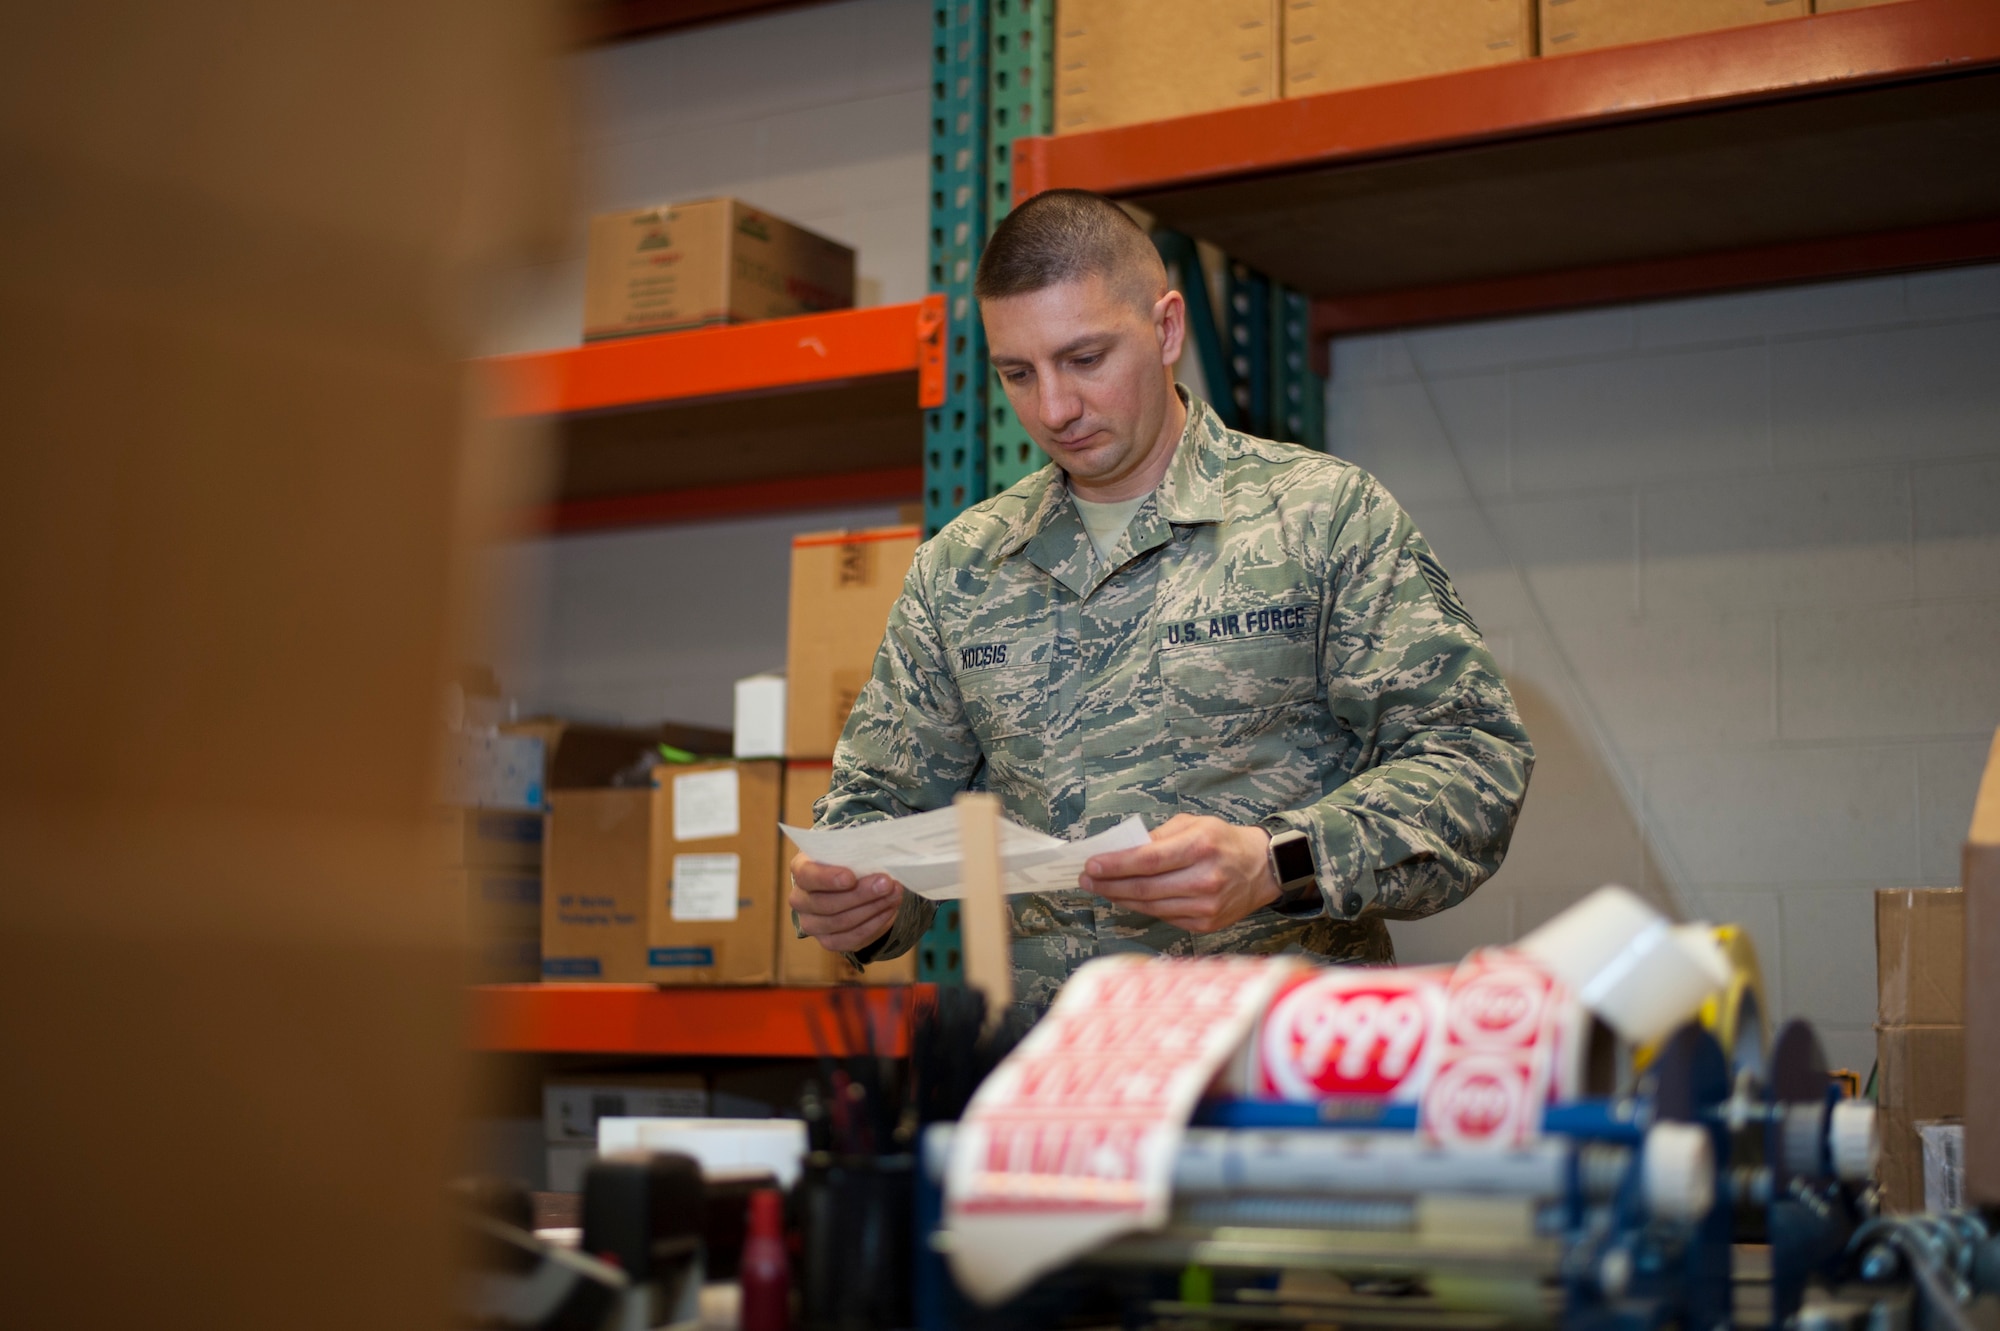 Traffic management specialists play critical role in mission readiness